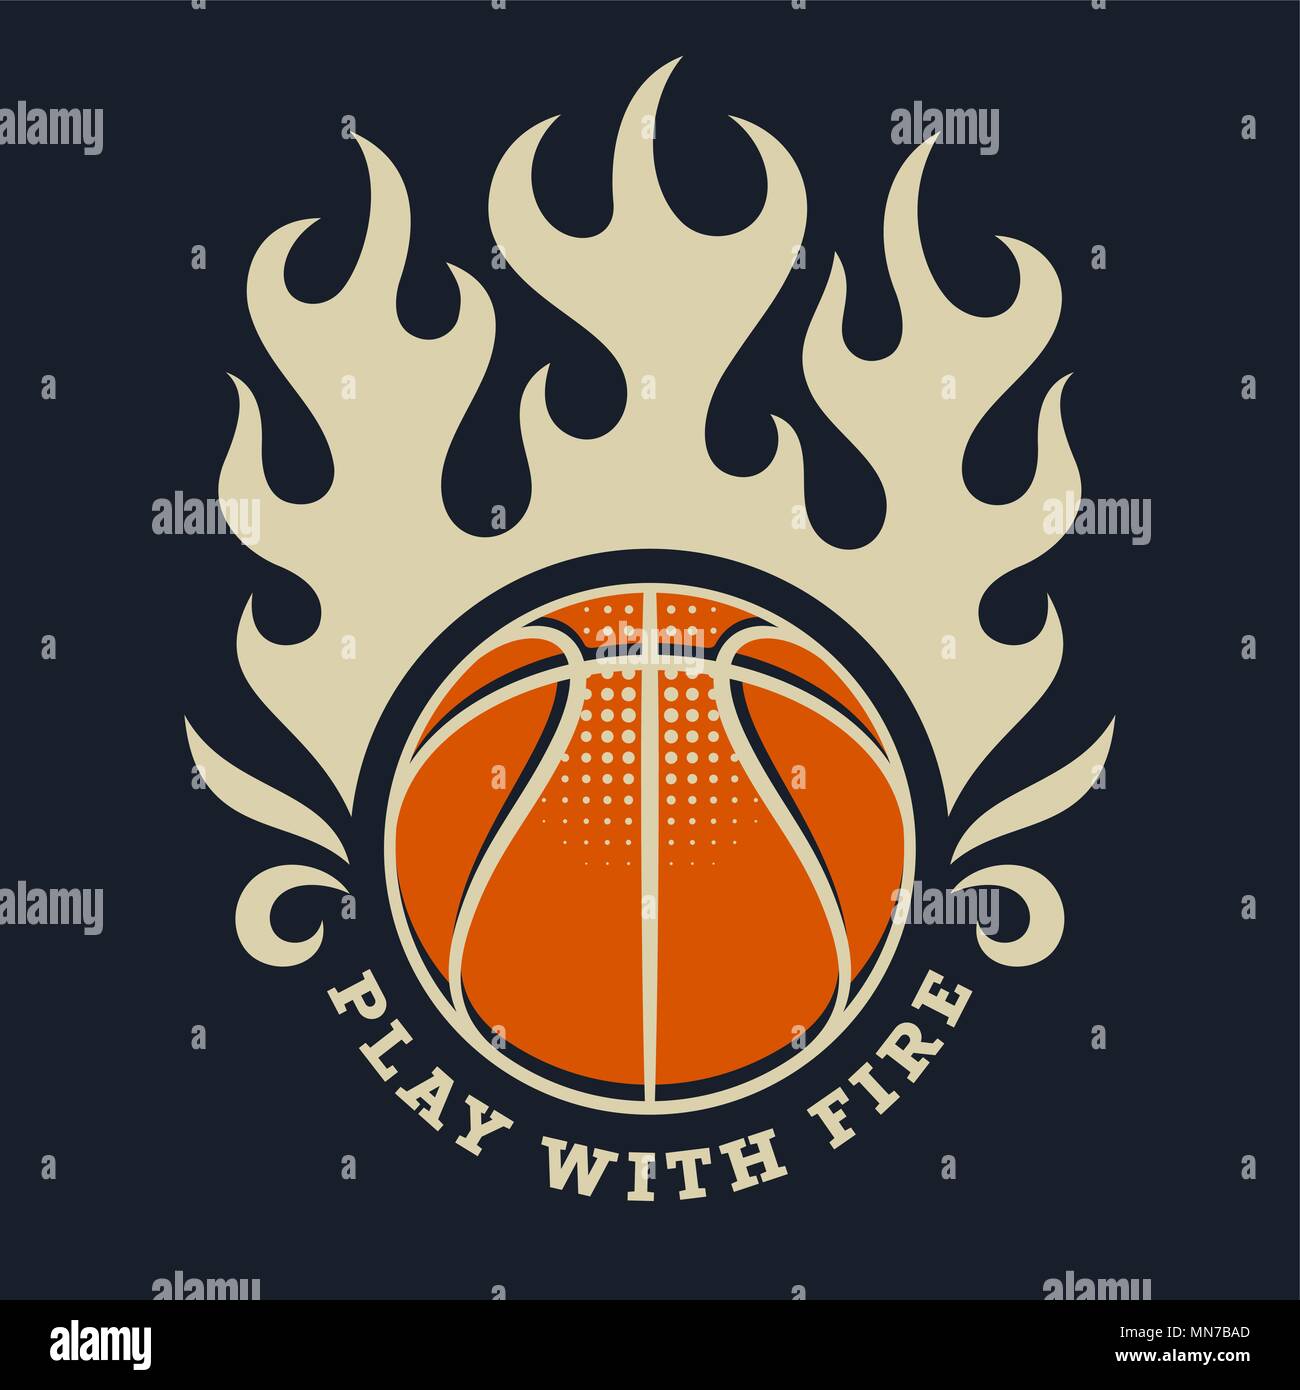 Athletic T-shirt graphics / Vintage Sport Illustration / Original graphic Tee / Athletic Motivational Quote / Basketball Team Emblem / Play with Fire Stock Vector